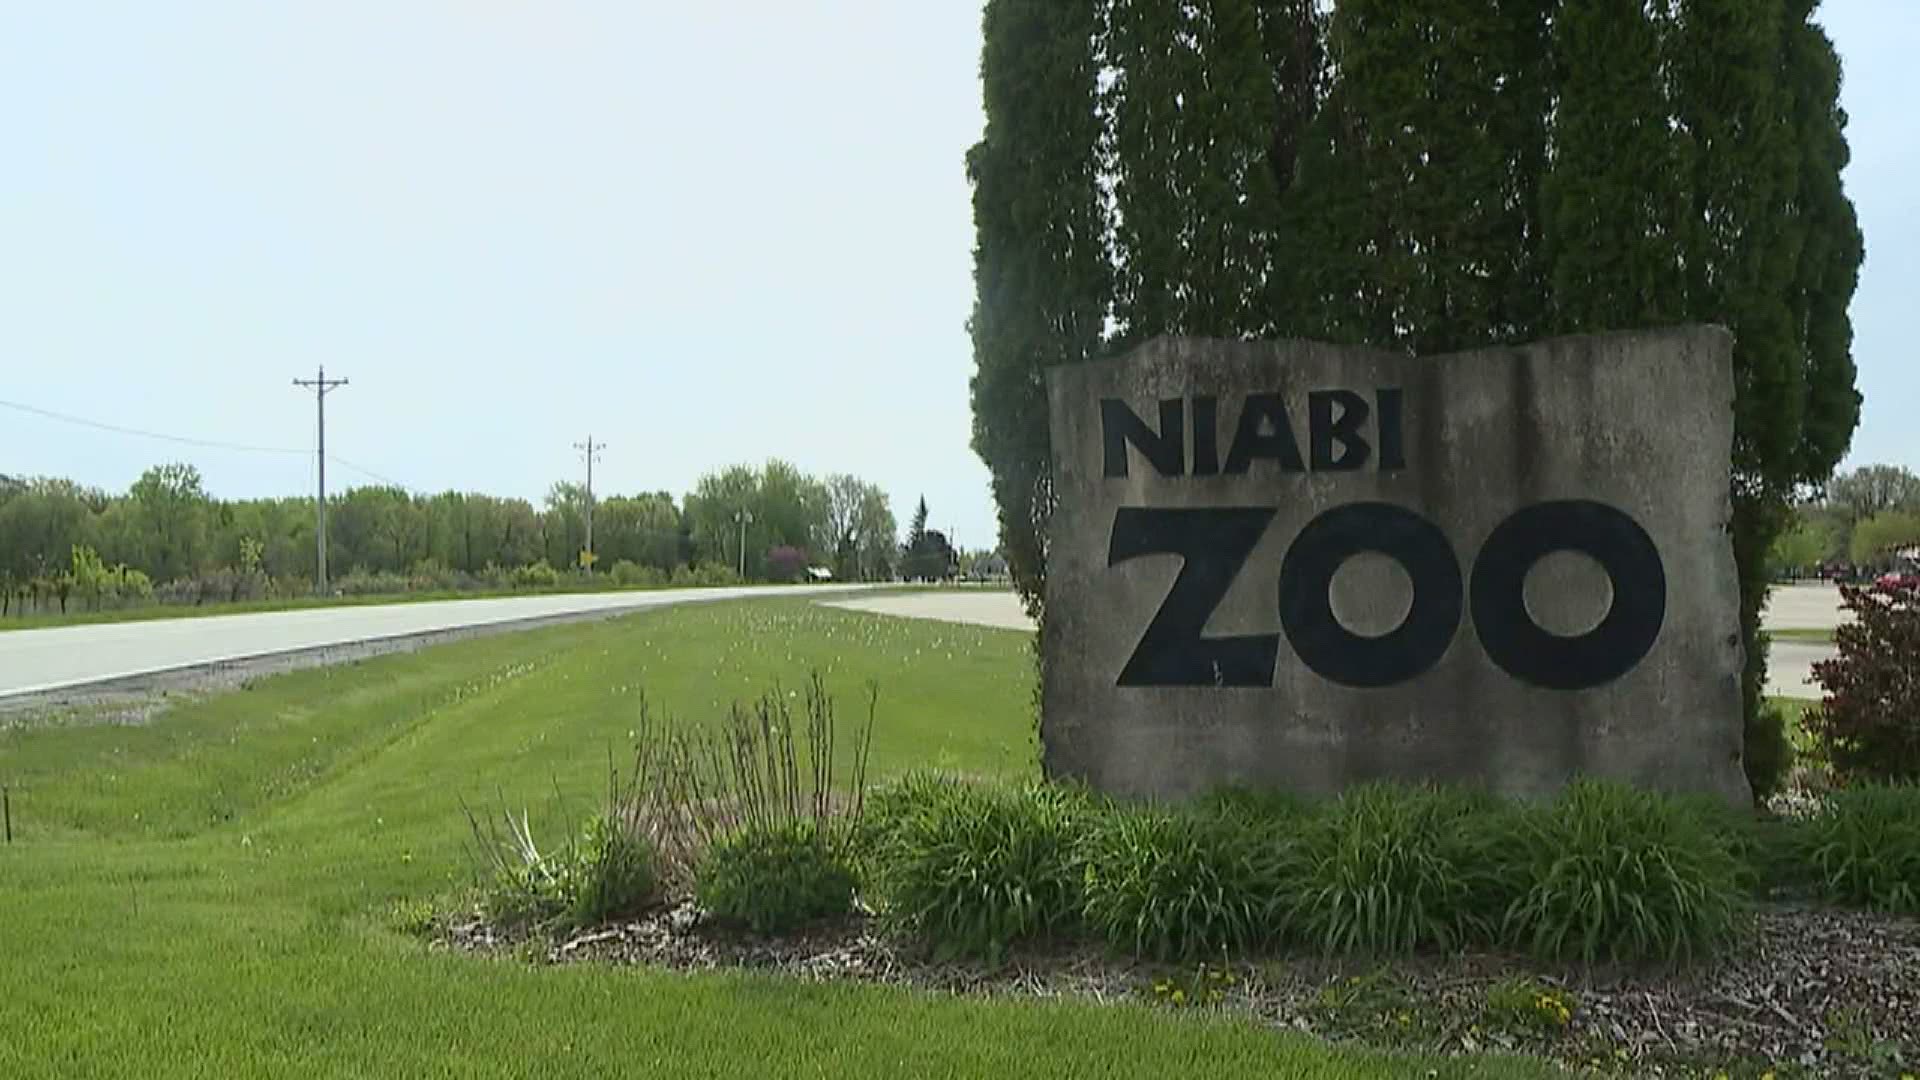 Niabi Zoo is announcing plans to reopen and Blues Fest has been canceled due to funding issues. People can still enjoy live music at the Bettendorf Spring Concert.